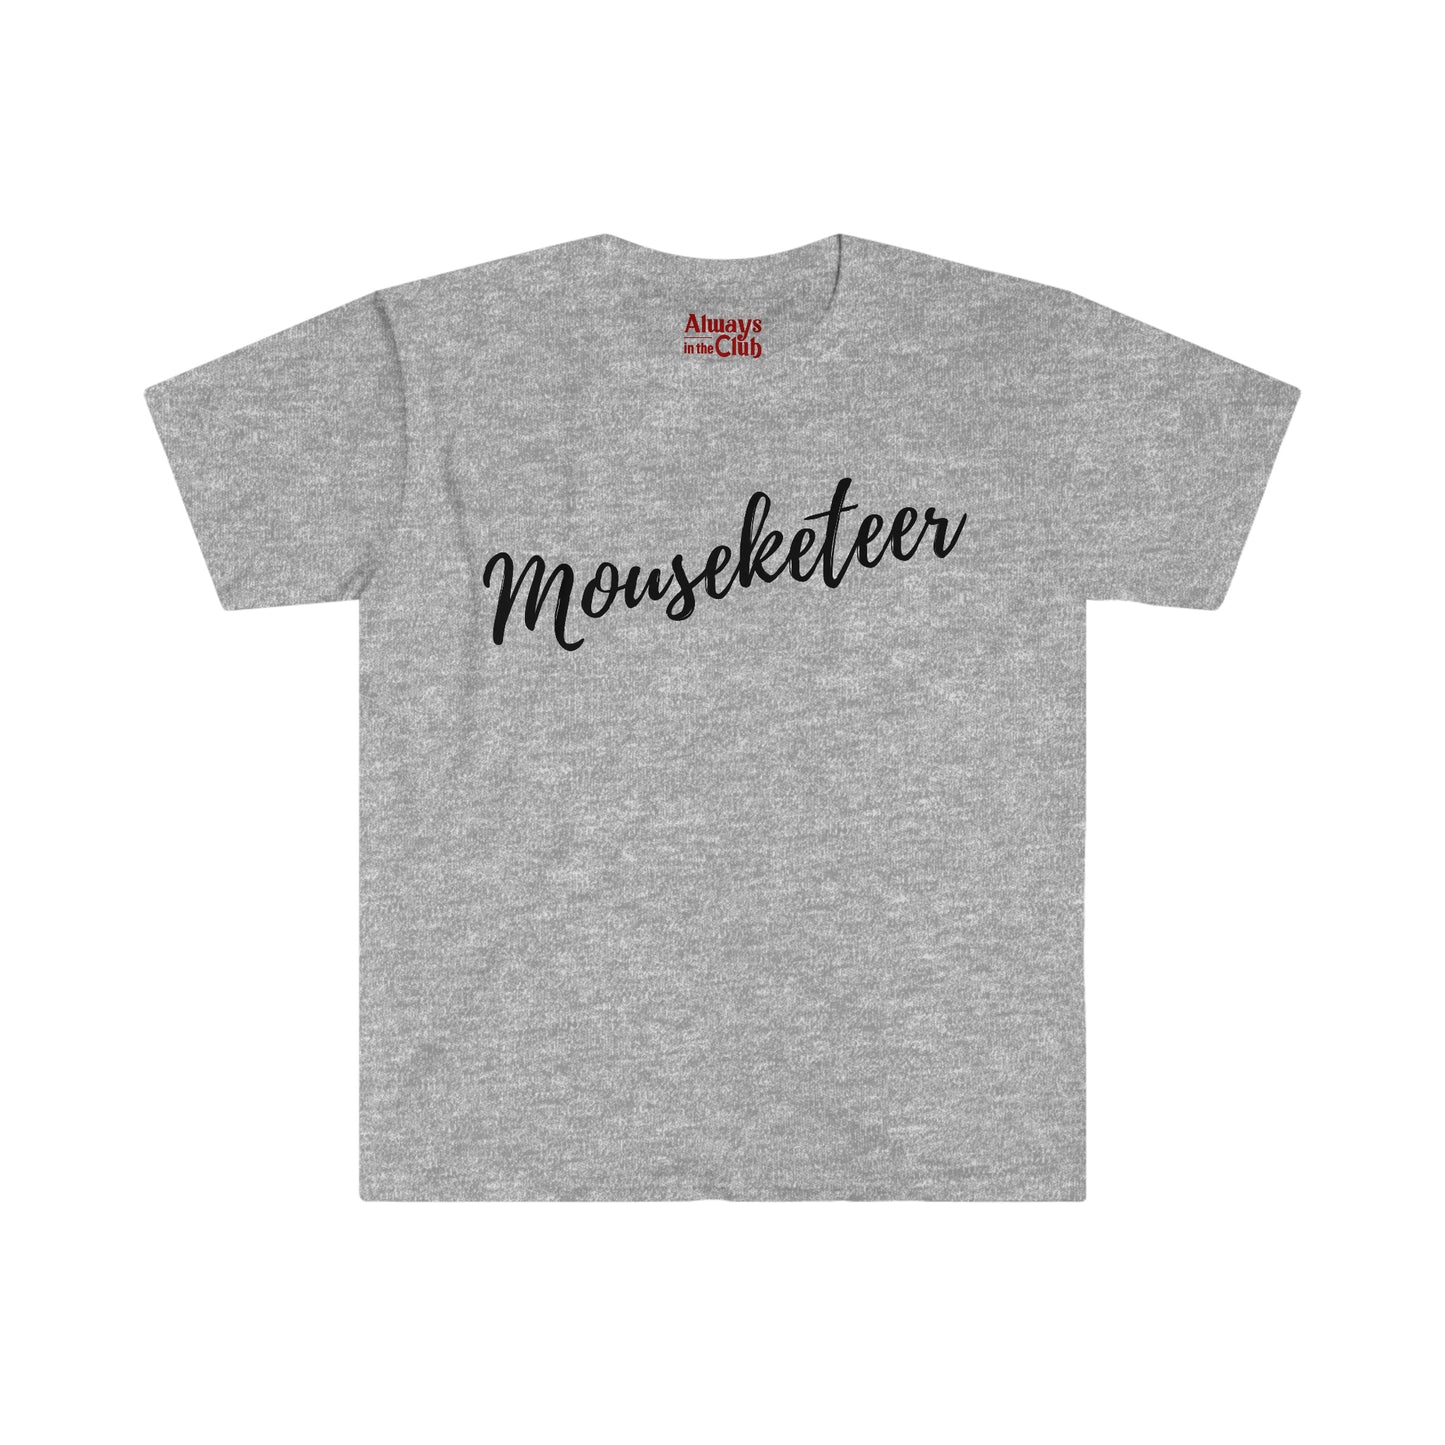 Always In The Club's Mouseketeer Unisex Softstyle T-Shirt - CLUB MEMBER EXCLUSIVE